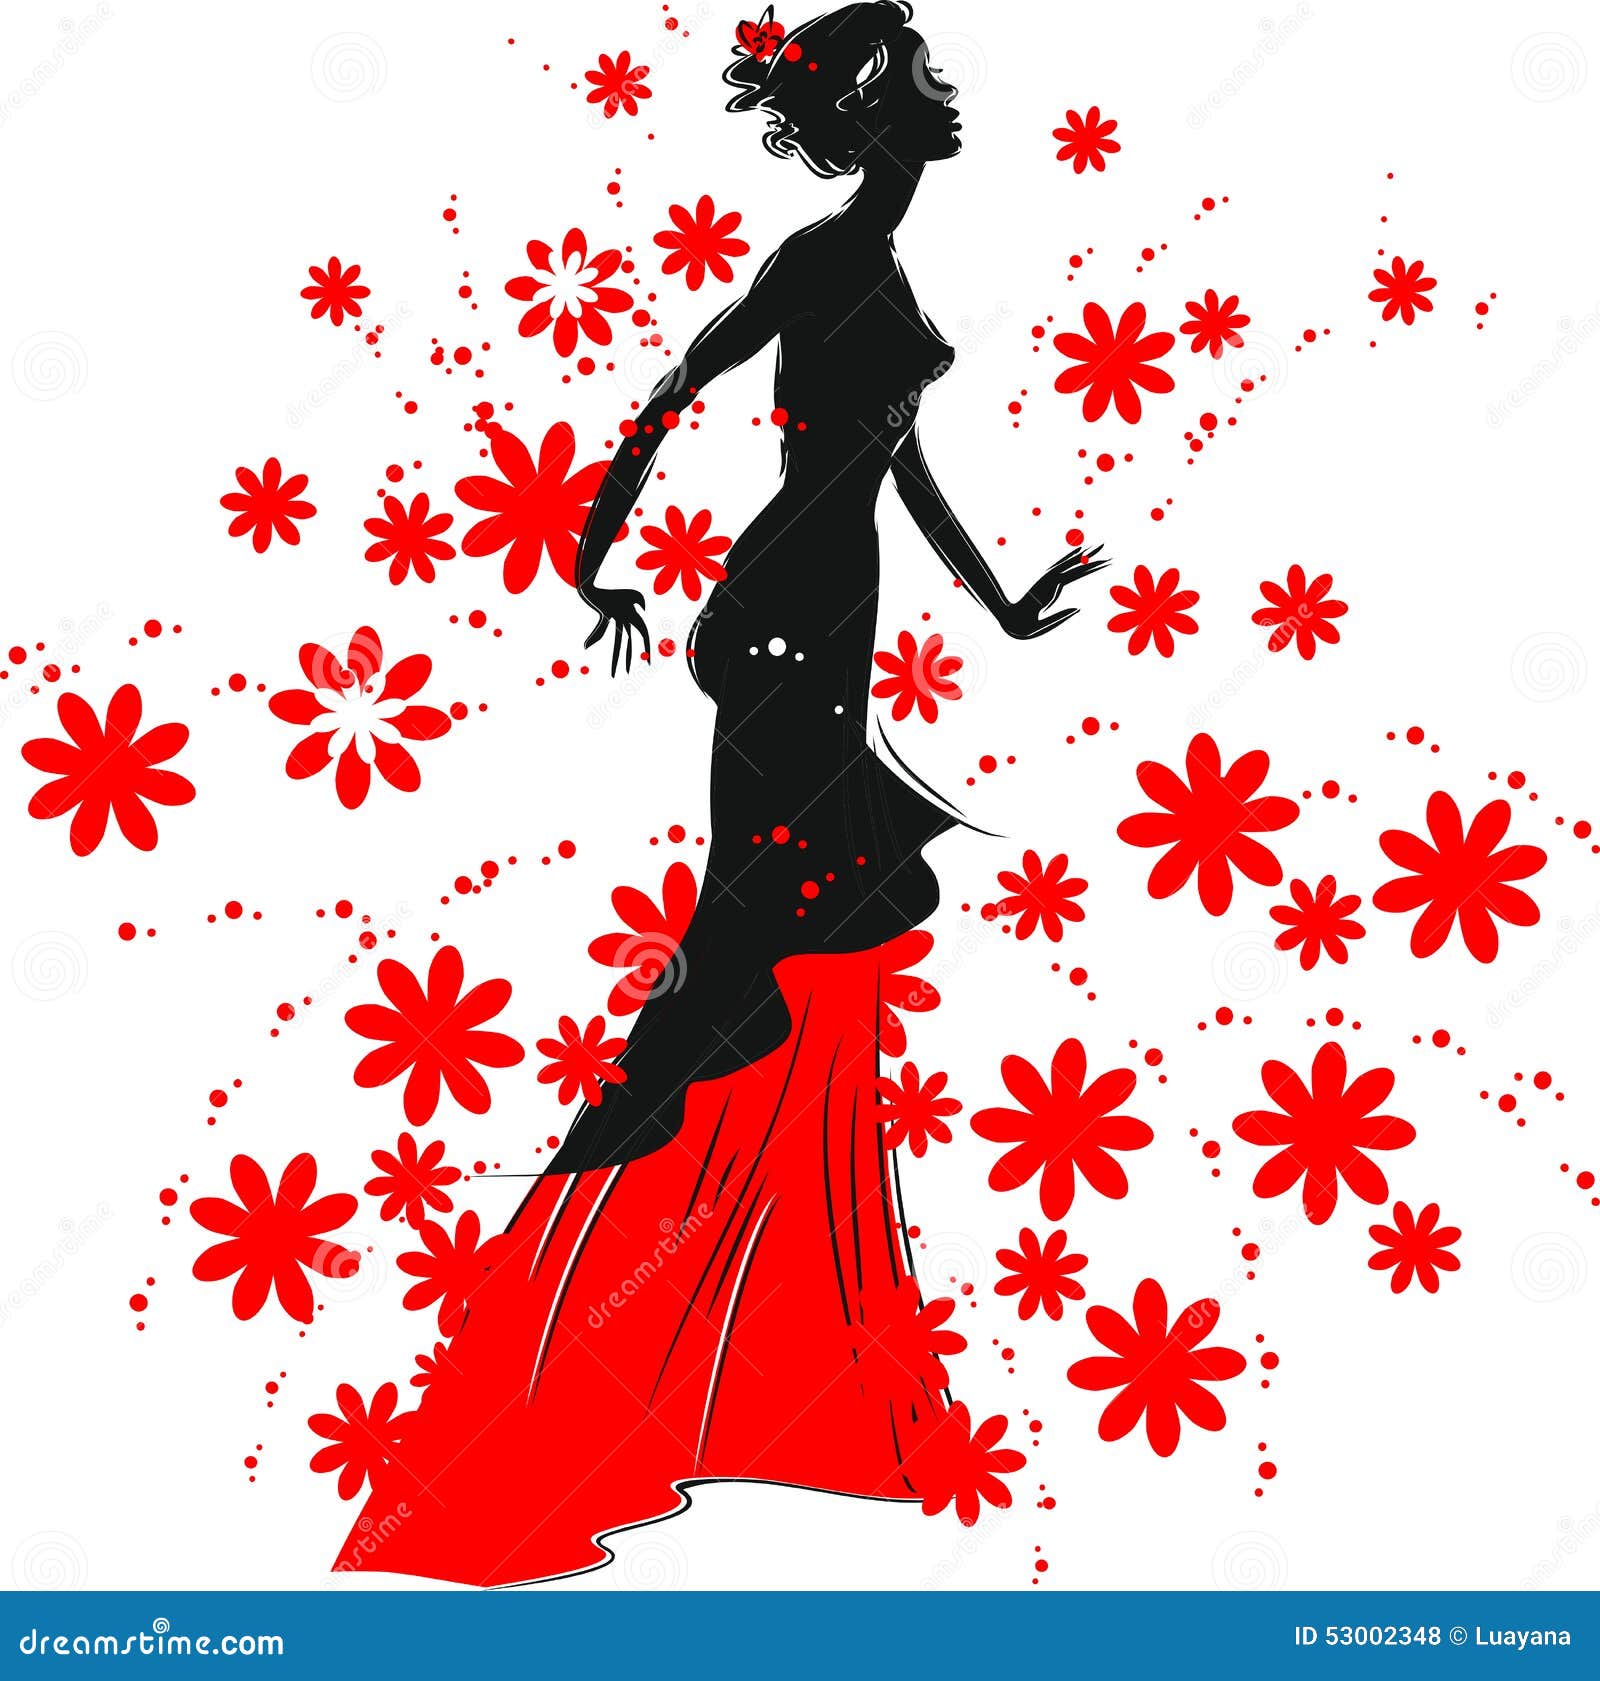 Silhouette of woman stock vector. Illustration of black - 53002348